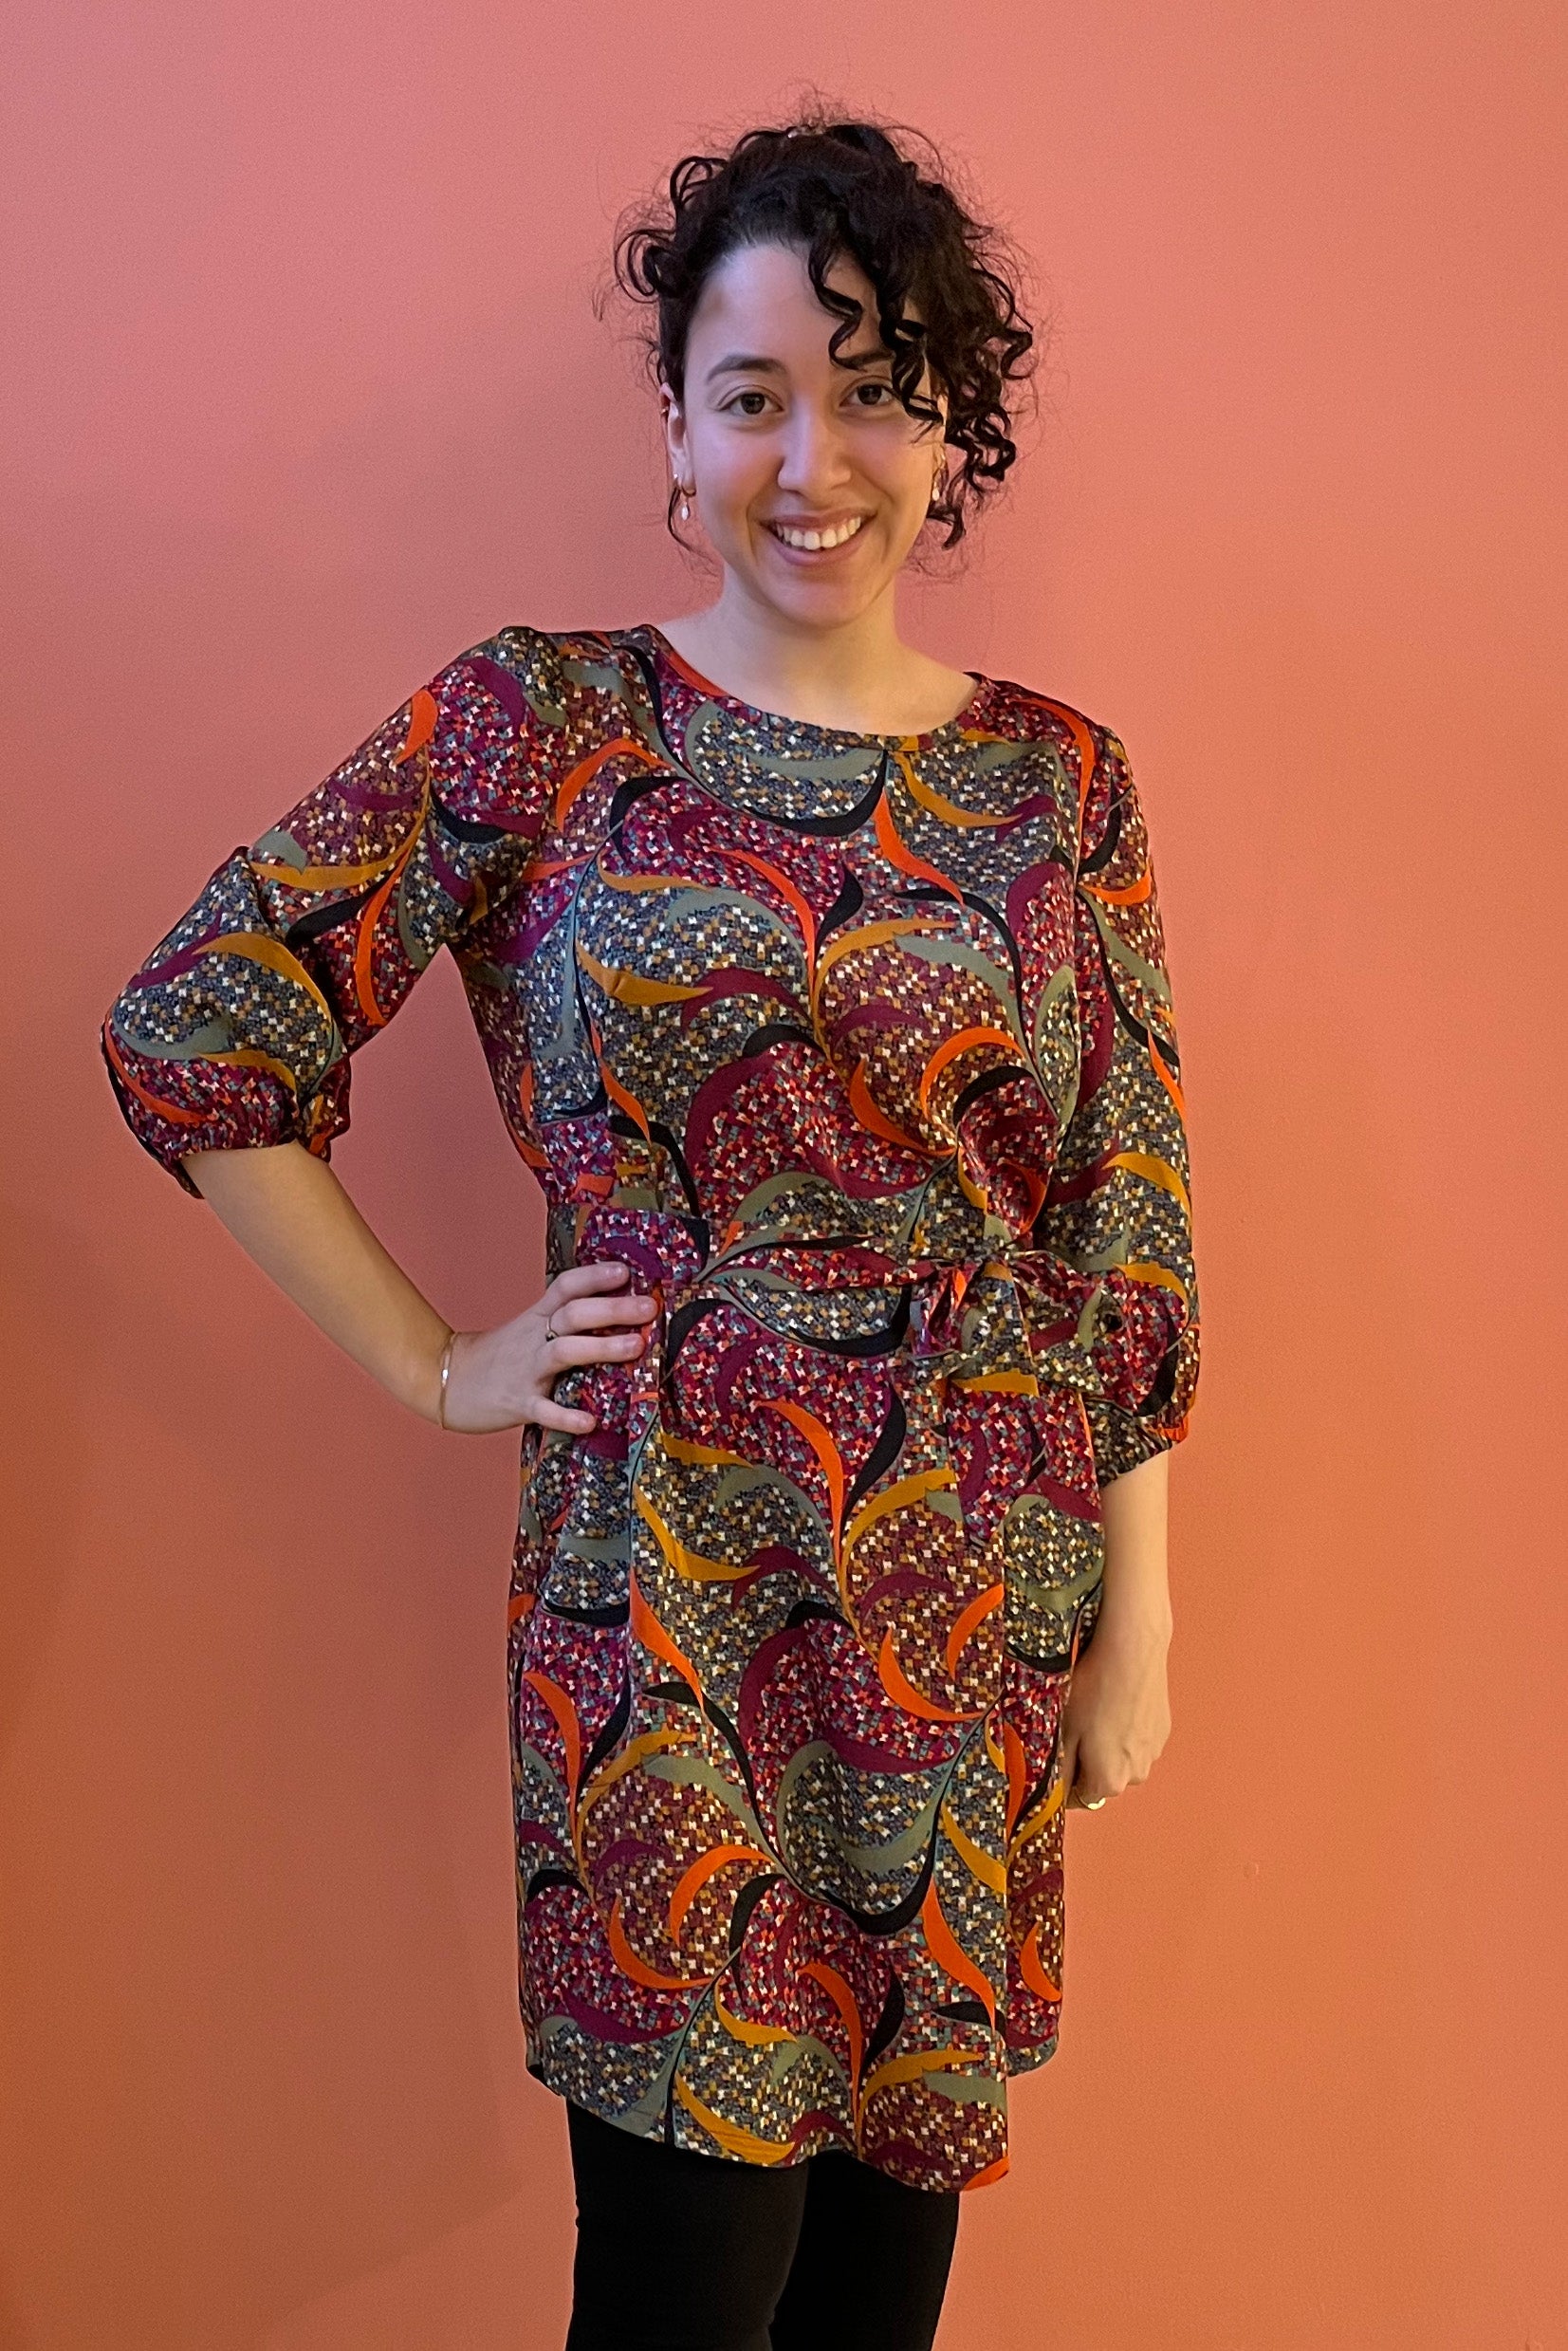 Shine Bloom Dress by Mandala, Spice, abstract print, jewel neck, 3/4 sleeves with gather and button detail, French darts, elastic at back waist, tie belt, scooped hem, sizes XS to XL, made in Ontario